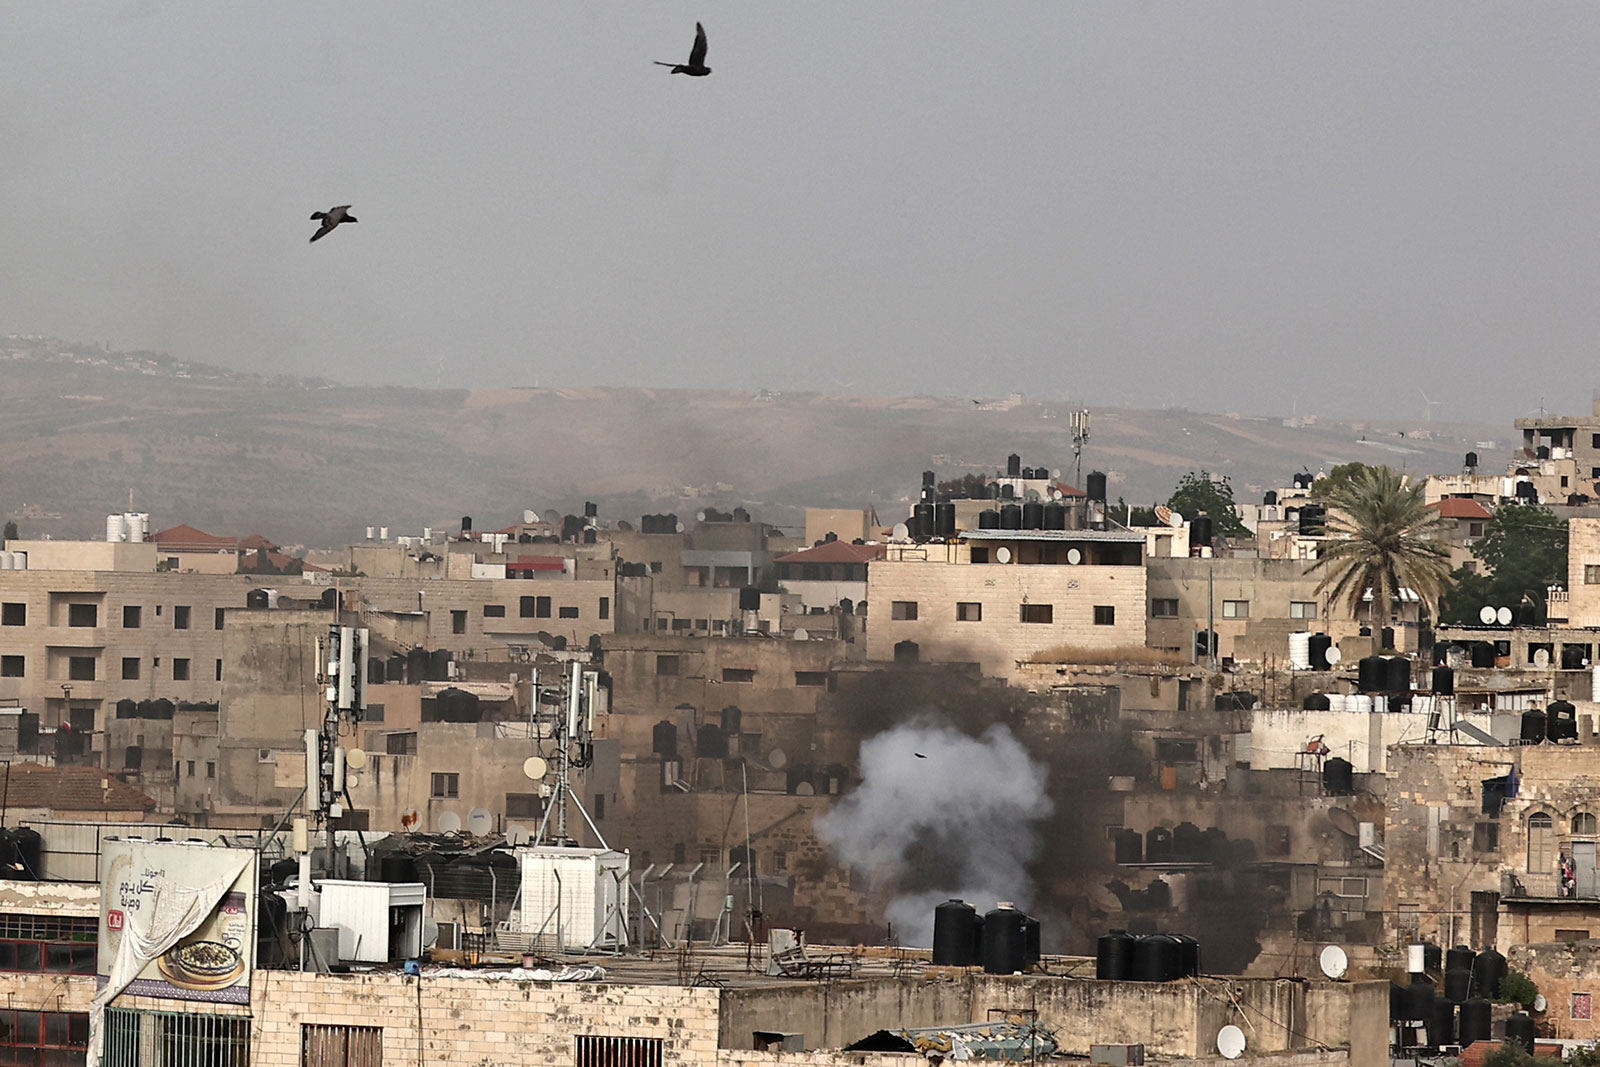 Smoke rises as ann Israeli raid on the West Bank city of Jenin stretched into a second day on Wednesday, May 22.